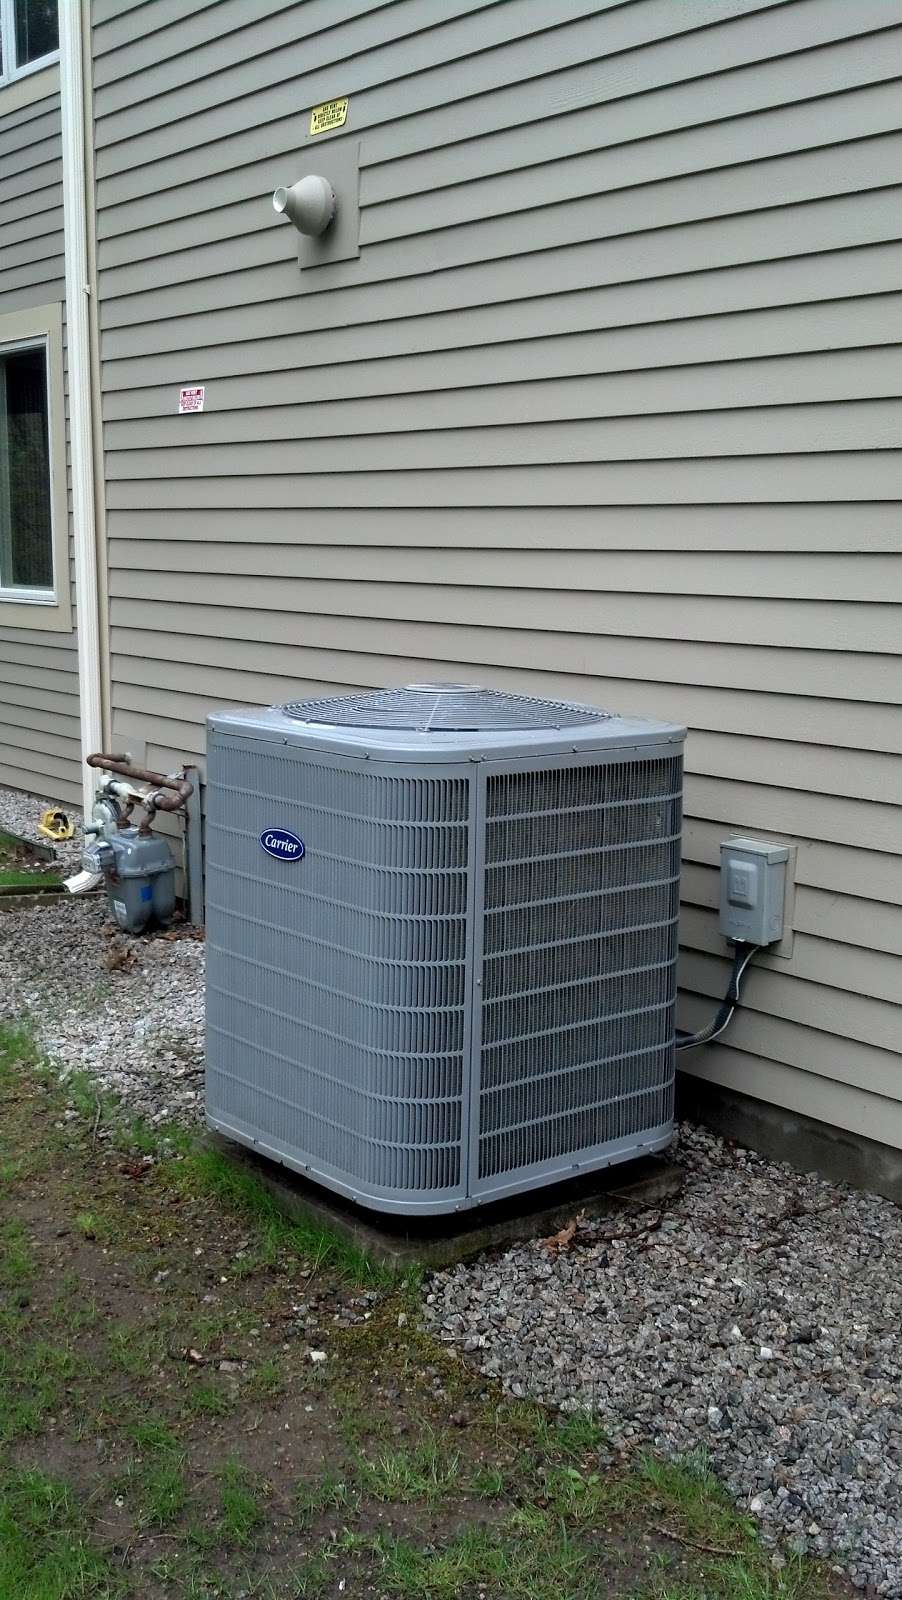 Thermal Climate Control Heating & Air Conditioning | 553 Gleasondale Rd, Stow, MA 01775 | Phone: (978) 897-0800